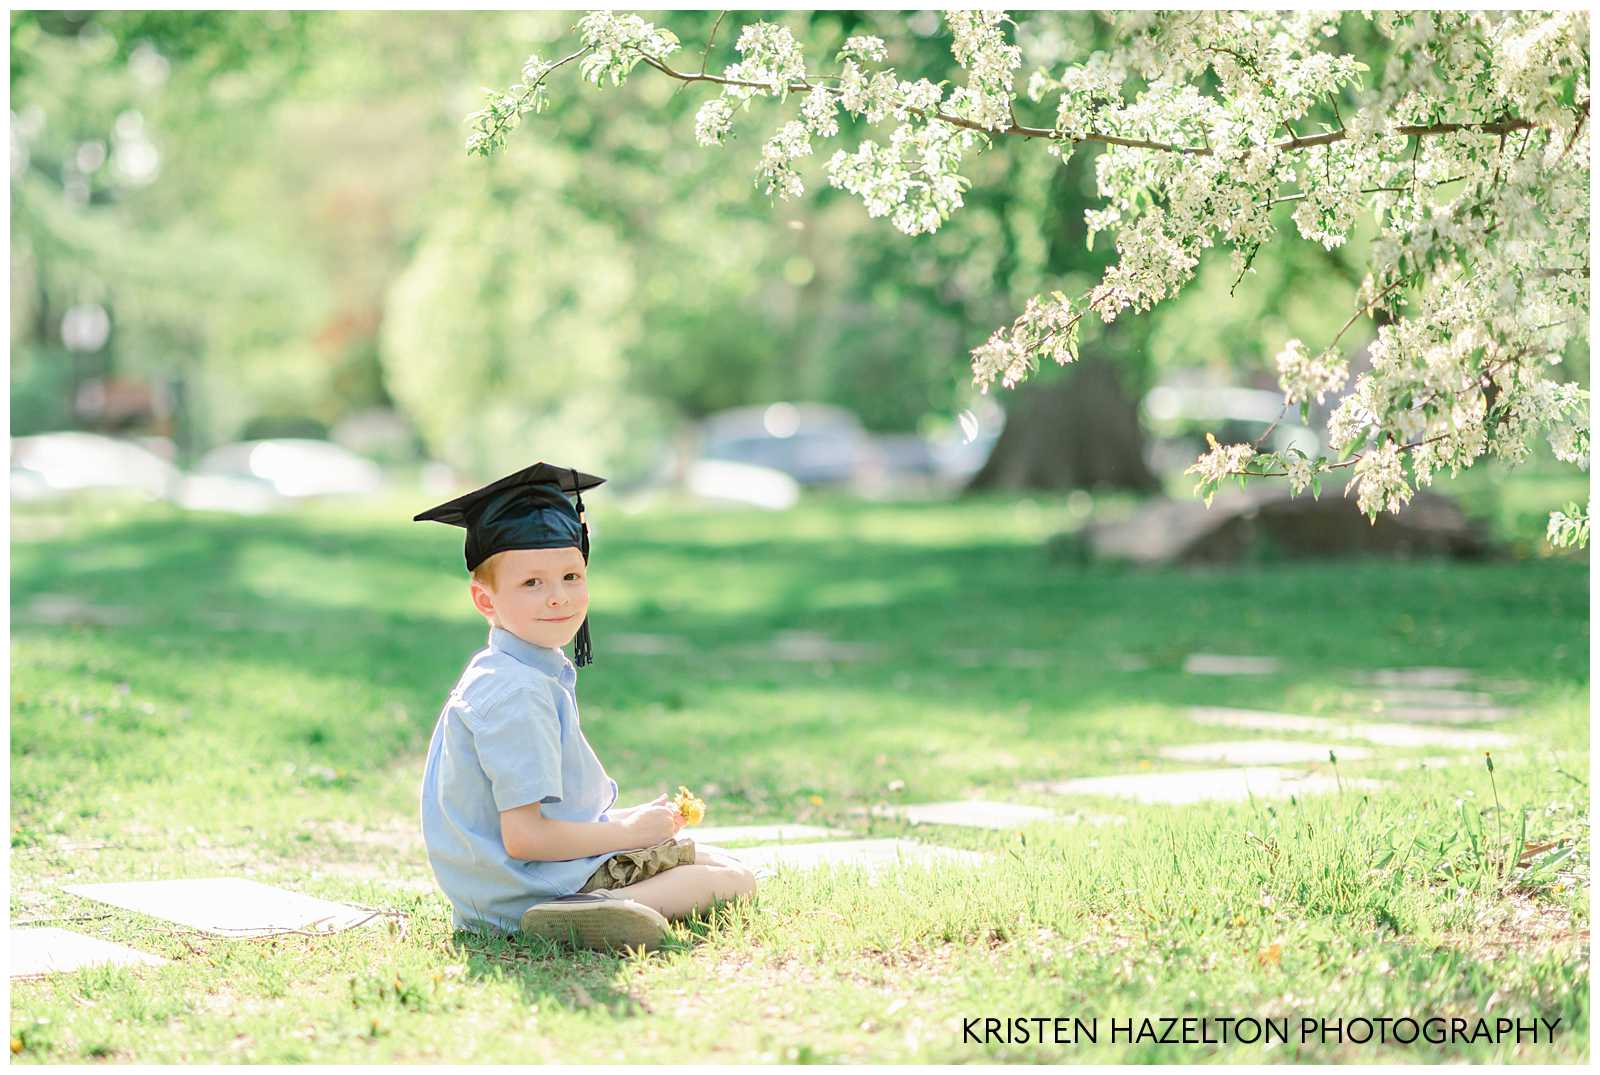 Young boy seated under a white flowering tree, wearing a graduation cap